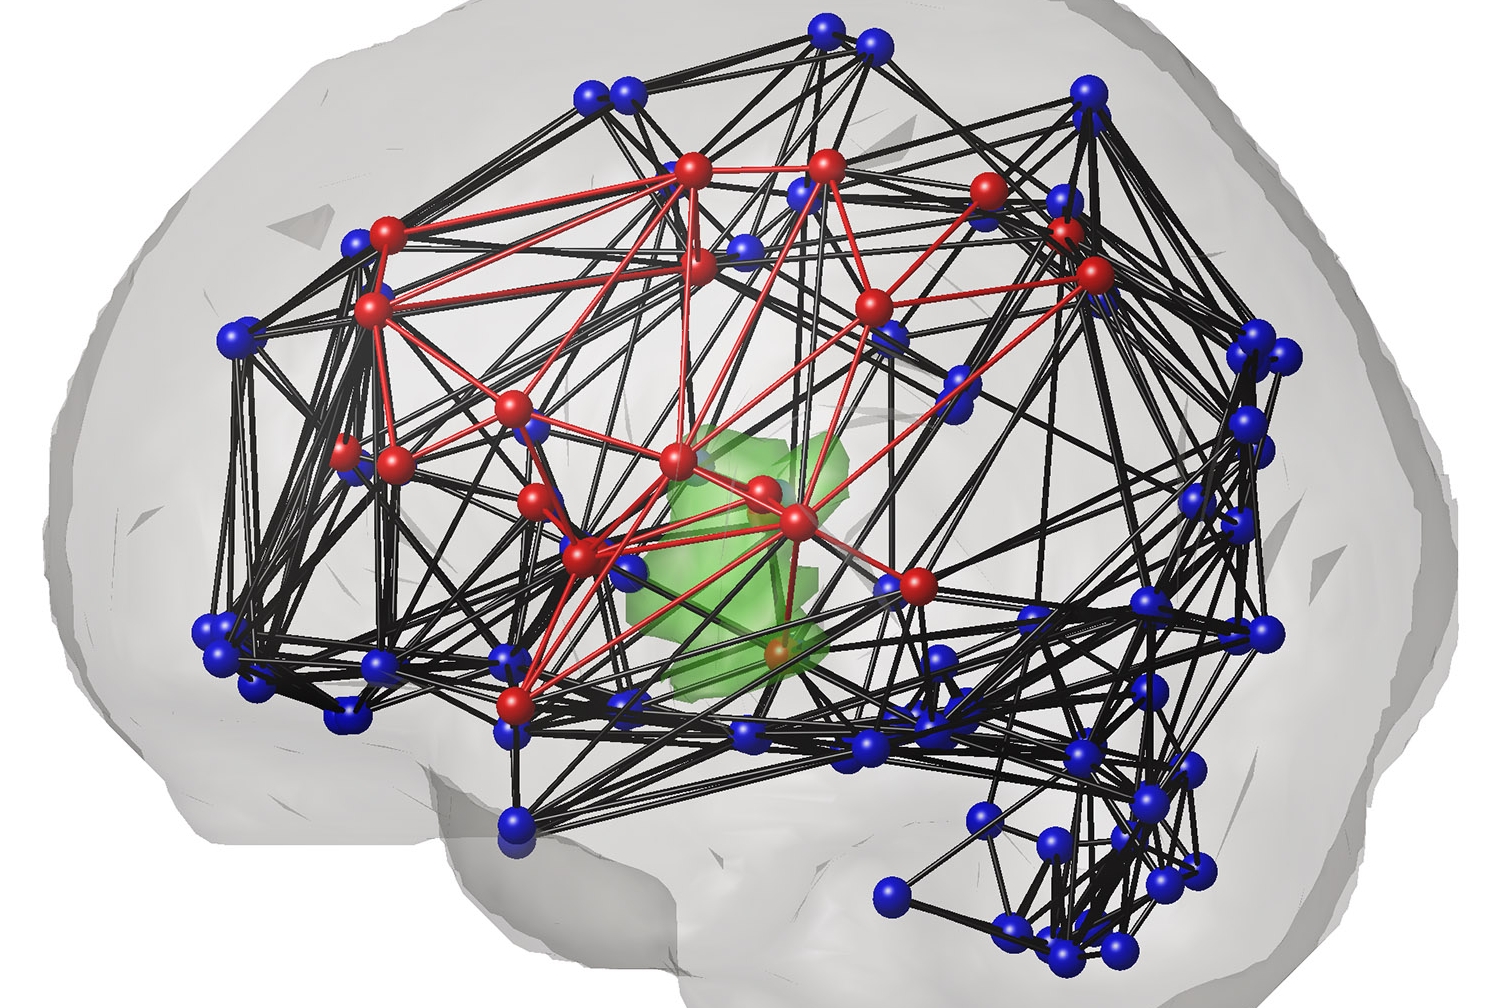 This so-called "glassbrain" visualizes the brain's structural connectivity network and the effects on the network of a particular ischemic stroke lesion, plotted in green. Each sphere represents a different gray matter region, with blue indicating that the stroke had no effect on the gray matter region's connectivity to the rest of the brain and red indicating that the stroke had some effect on the gray matter region's connectivity to the rest of the brain. Pipes between the spheres indicate that a structur